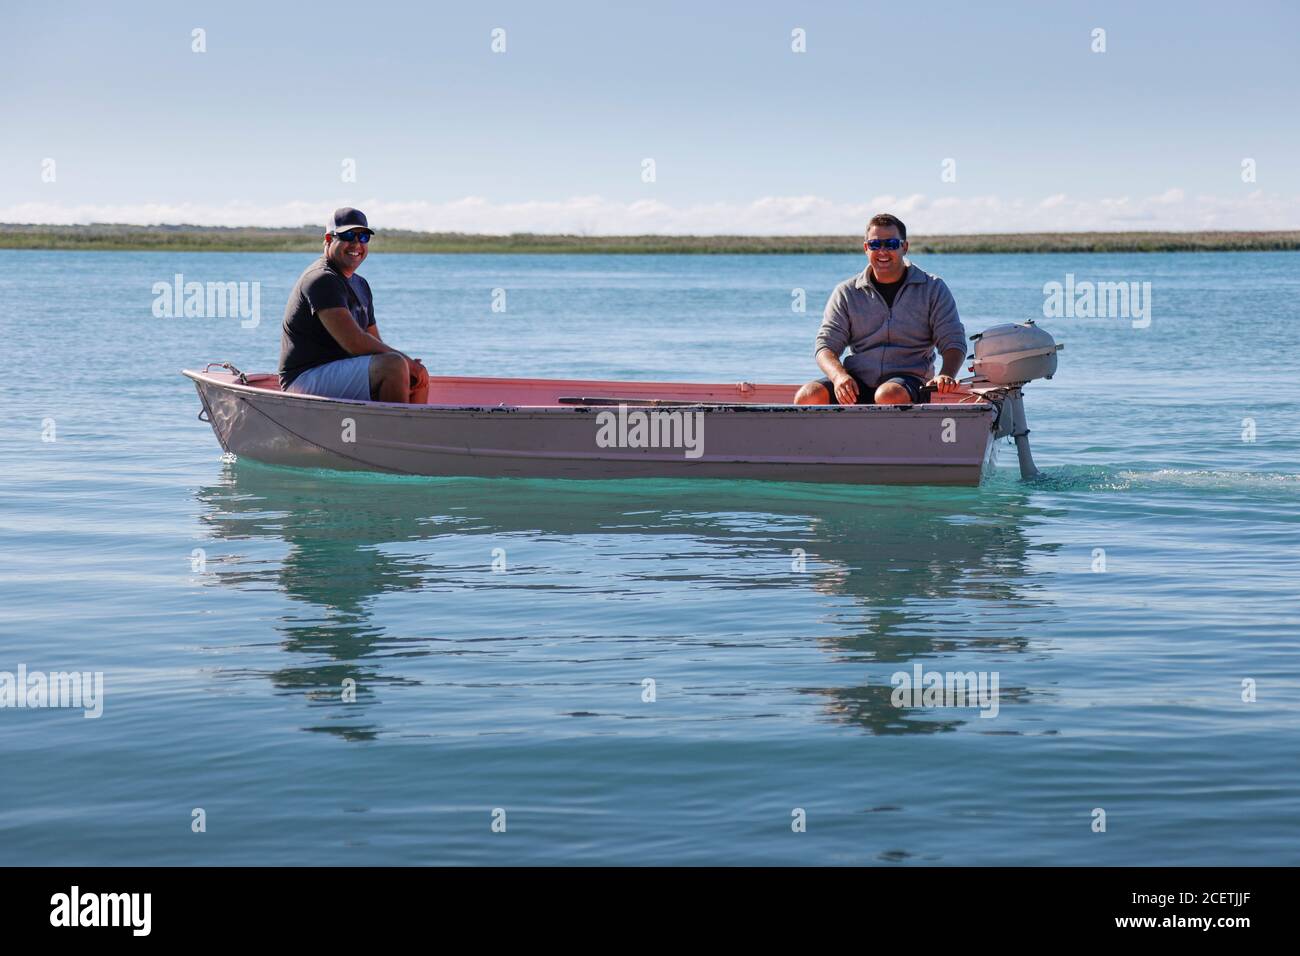 Two men driving a small outboard-powered boat on a lake. Stock Photo